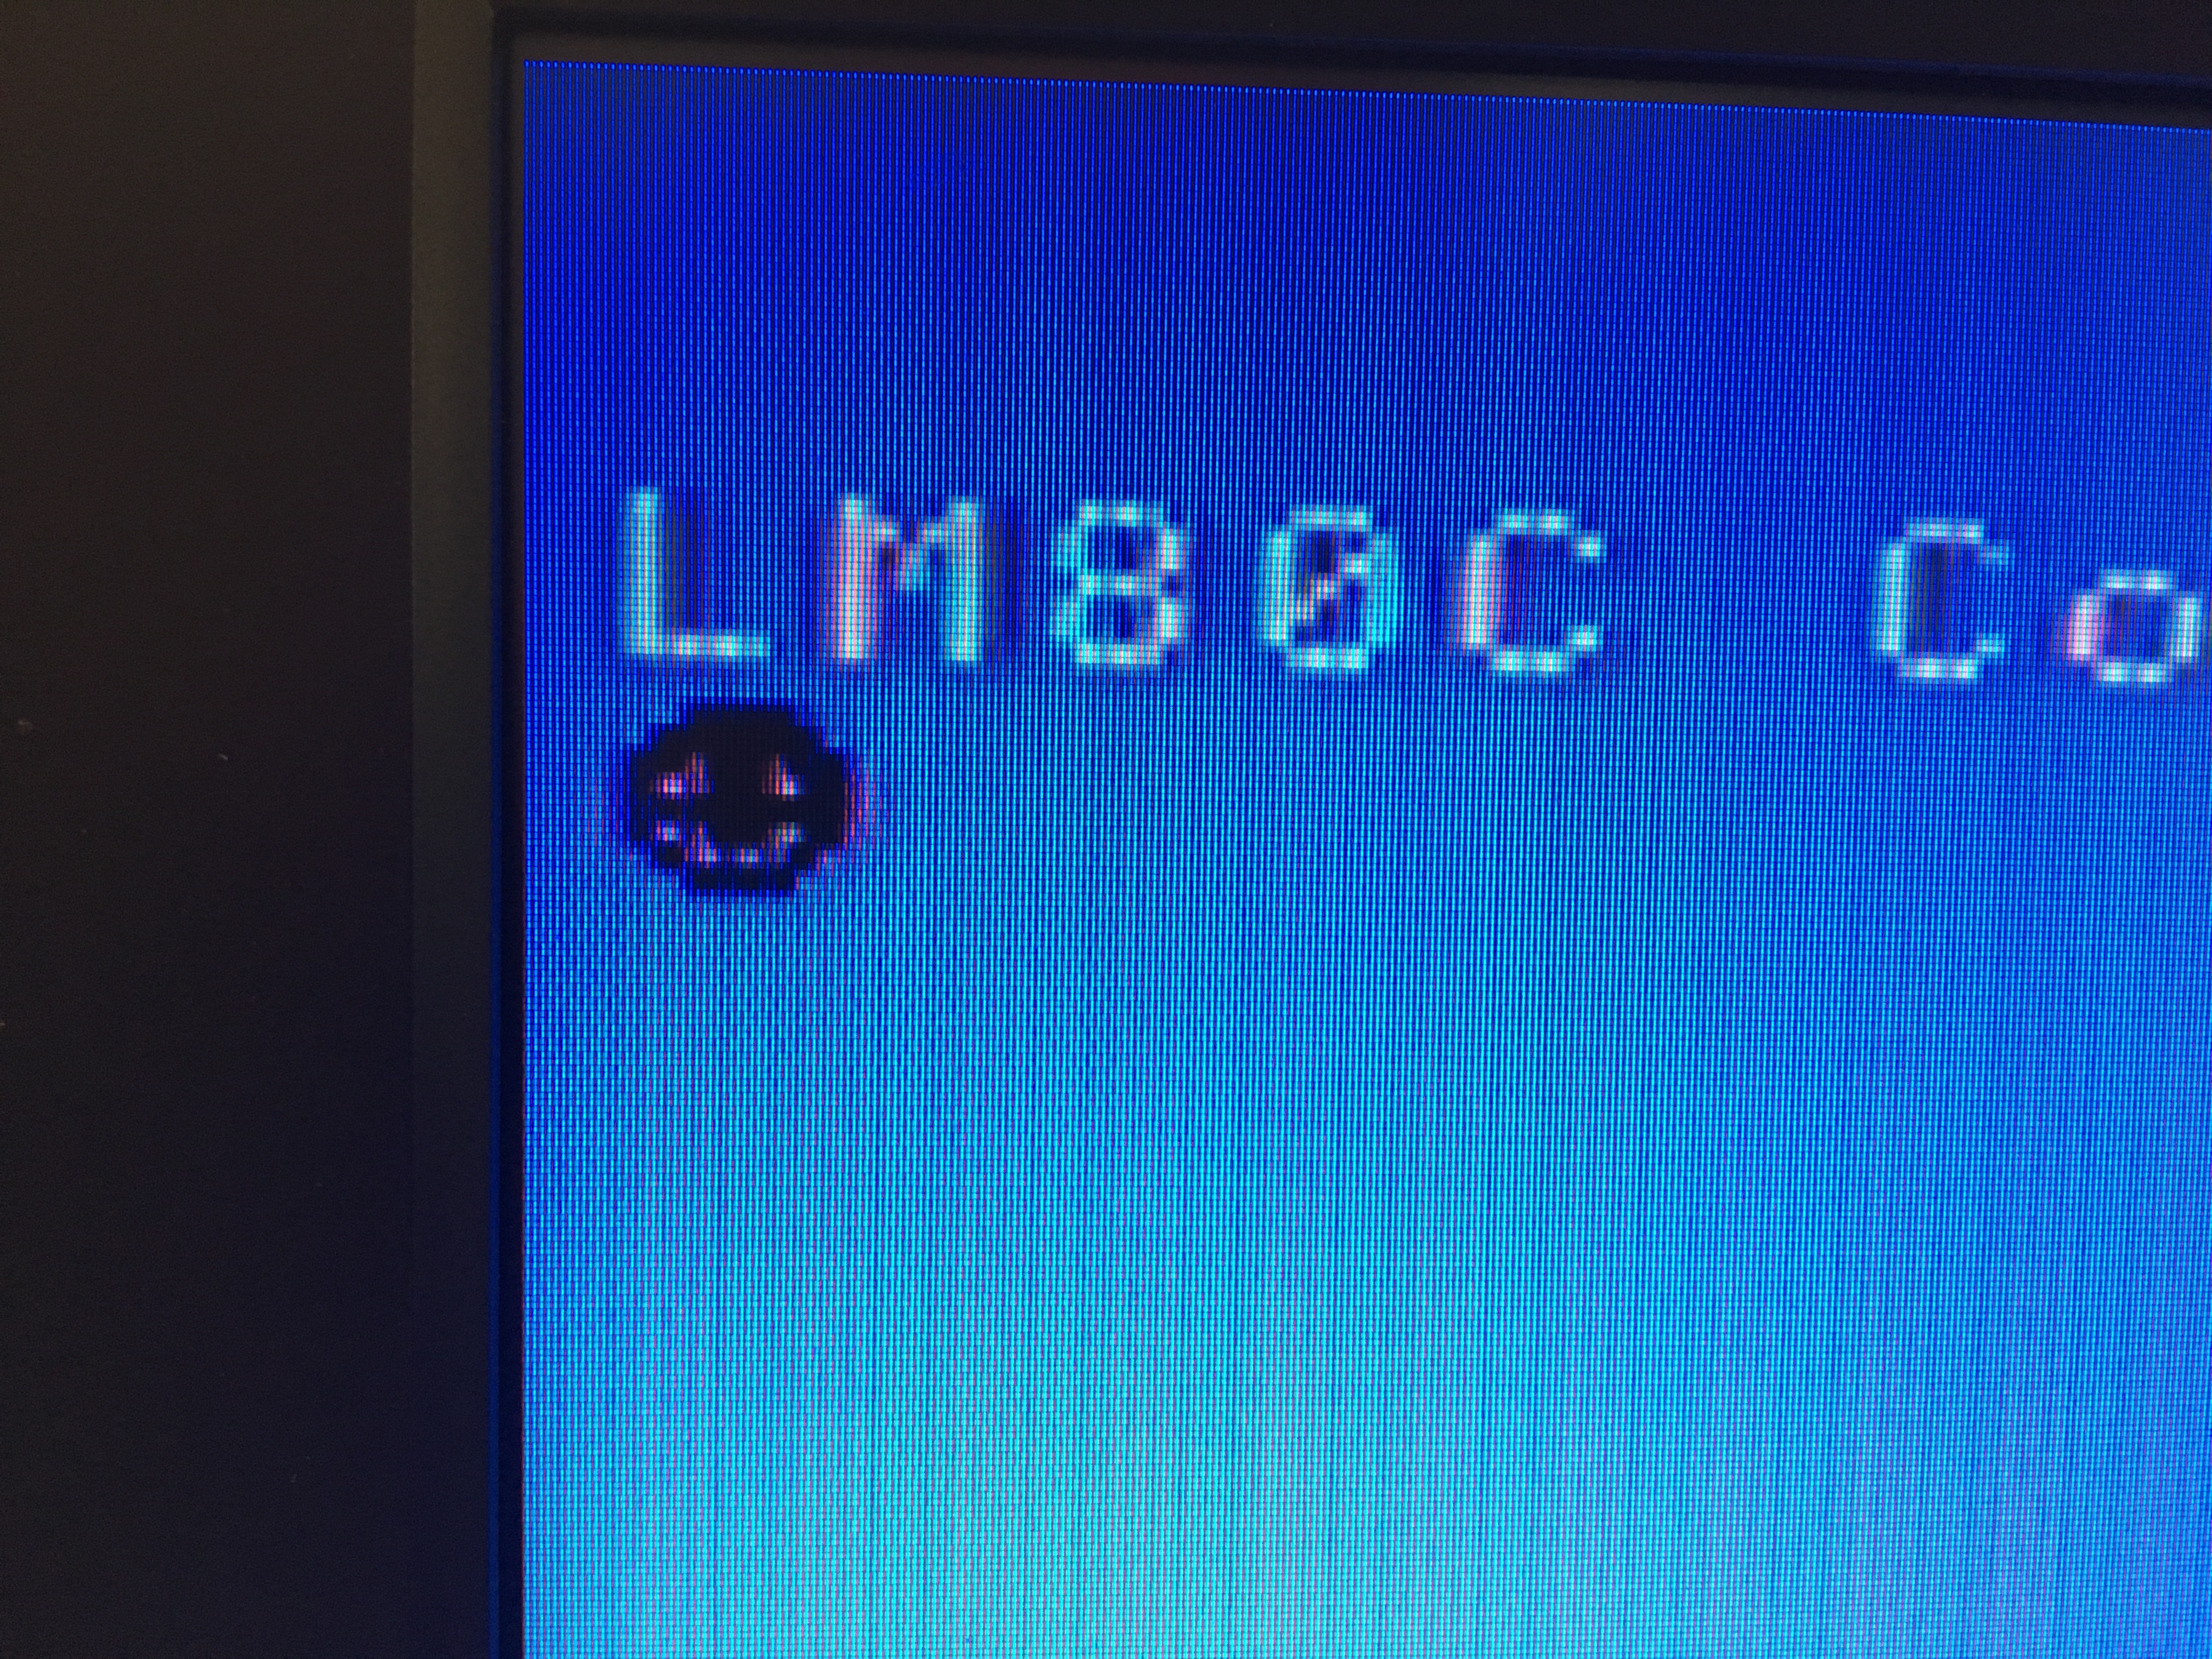 LM80C - text and sprite